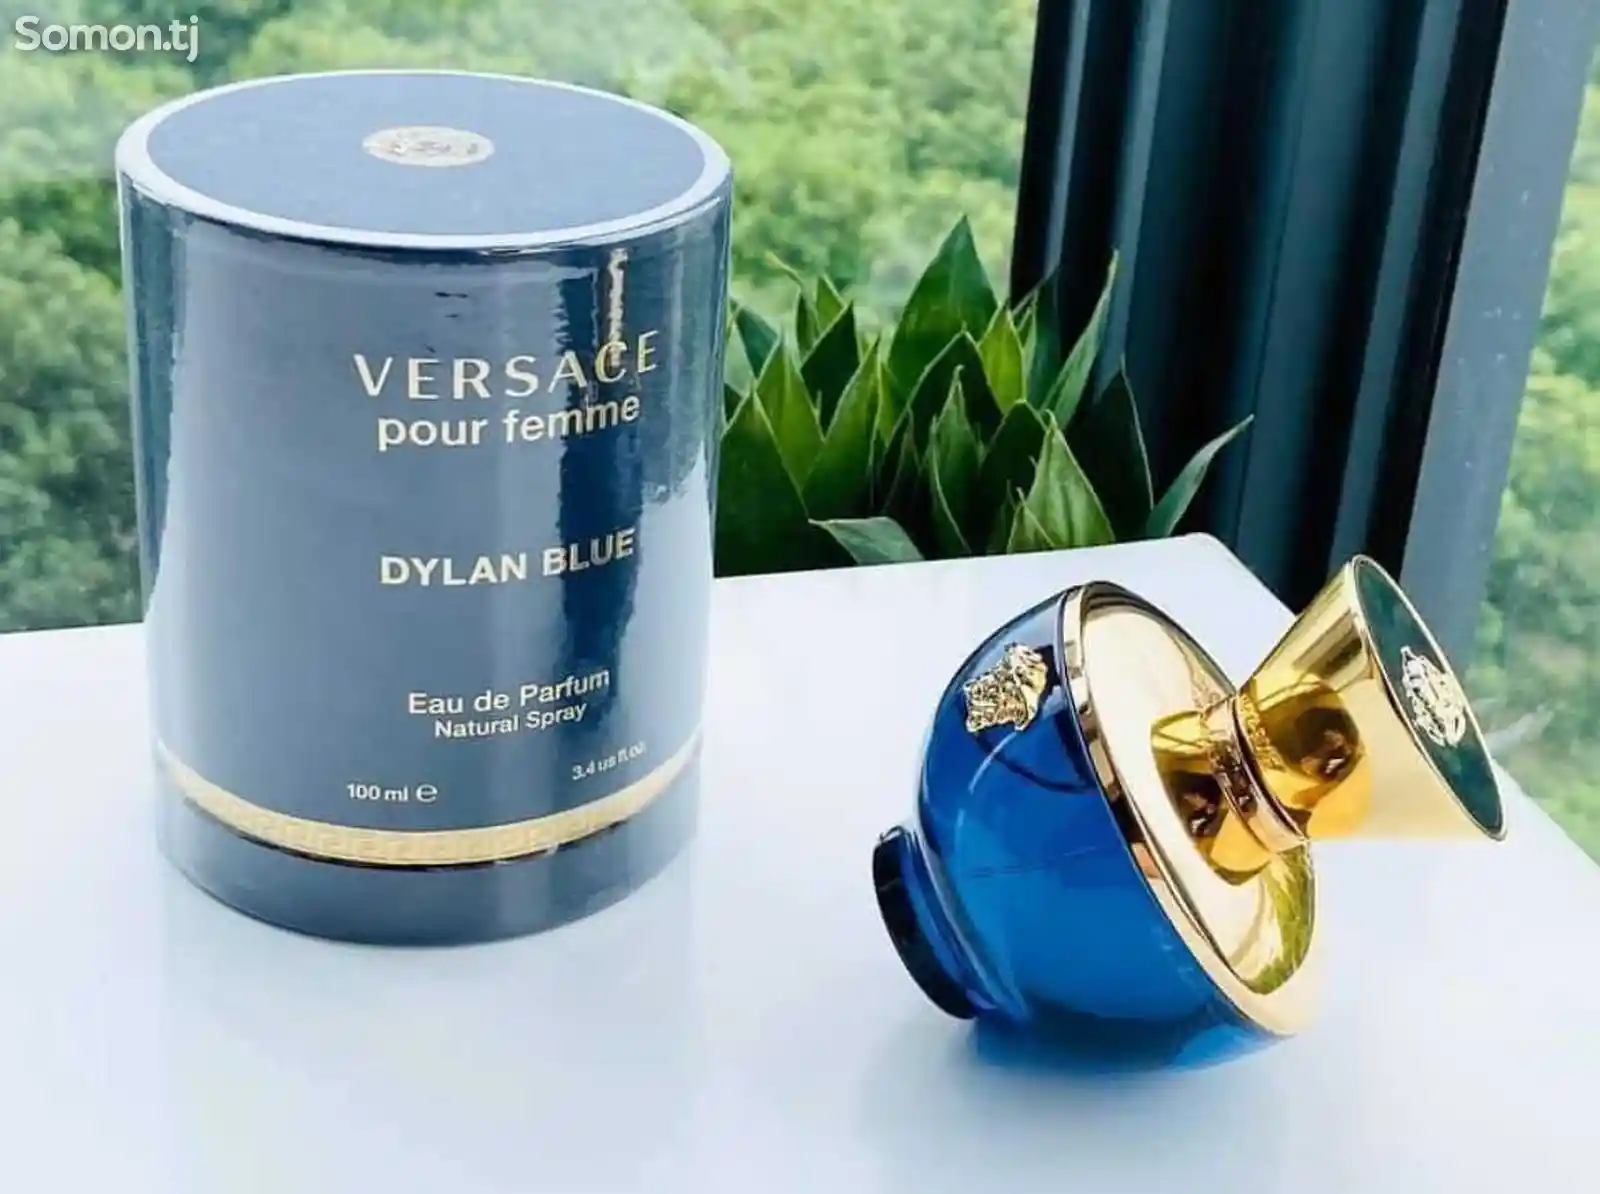 Парфюм Versace Dylan blue pour